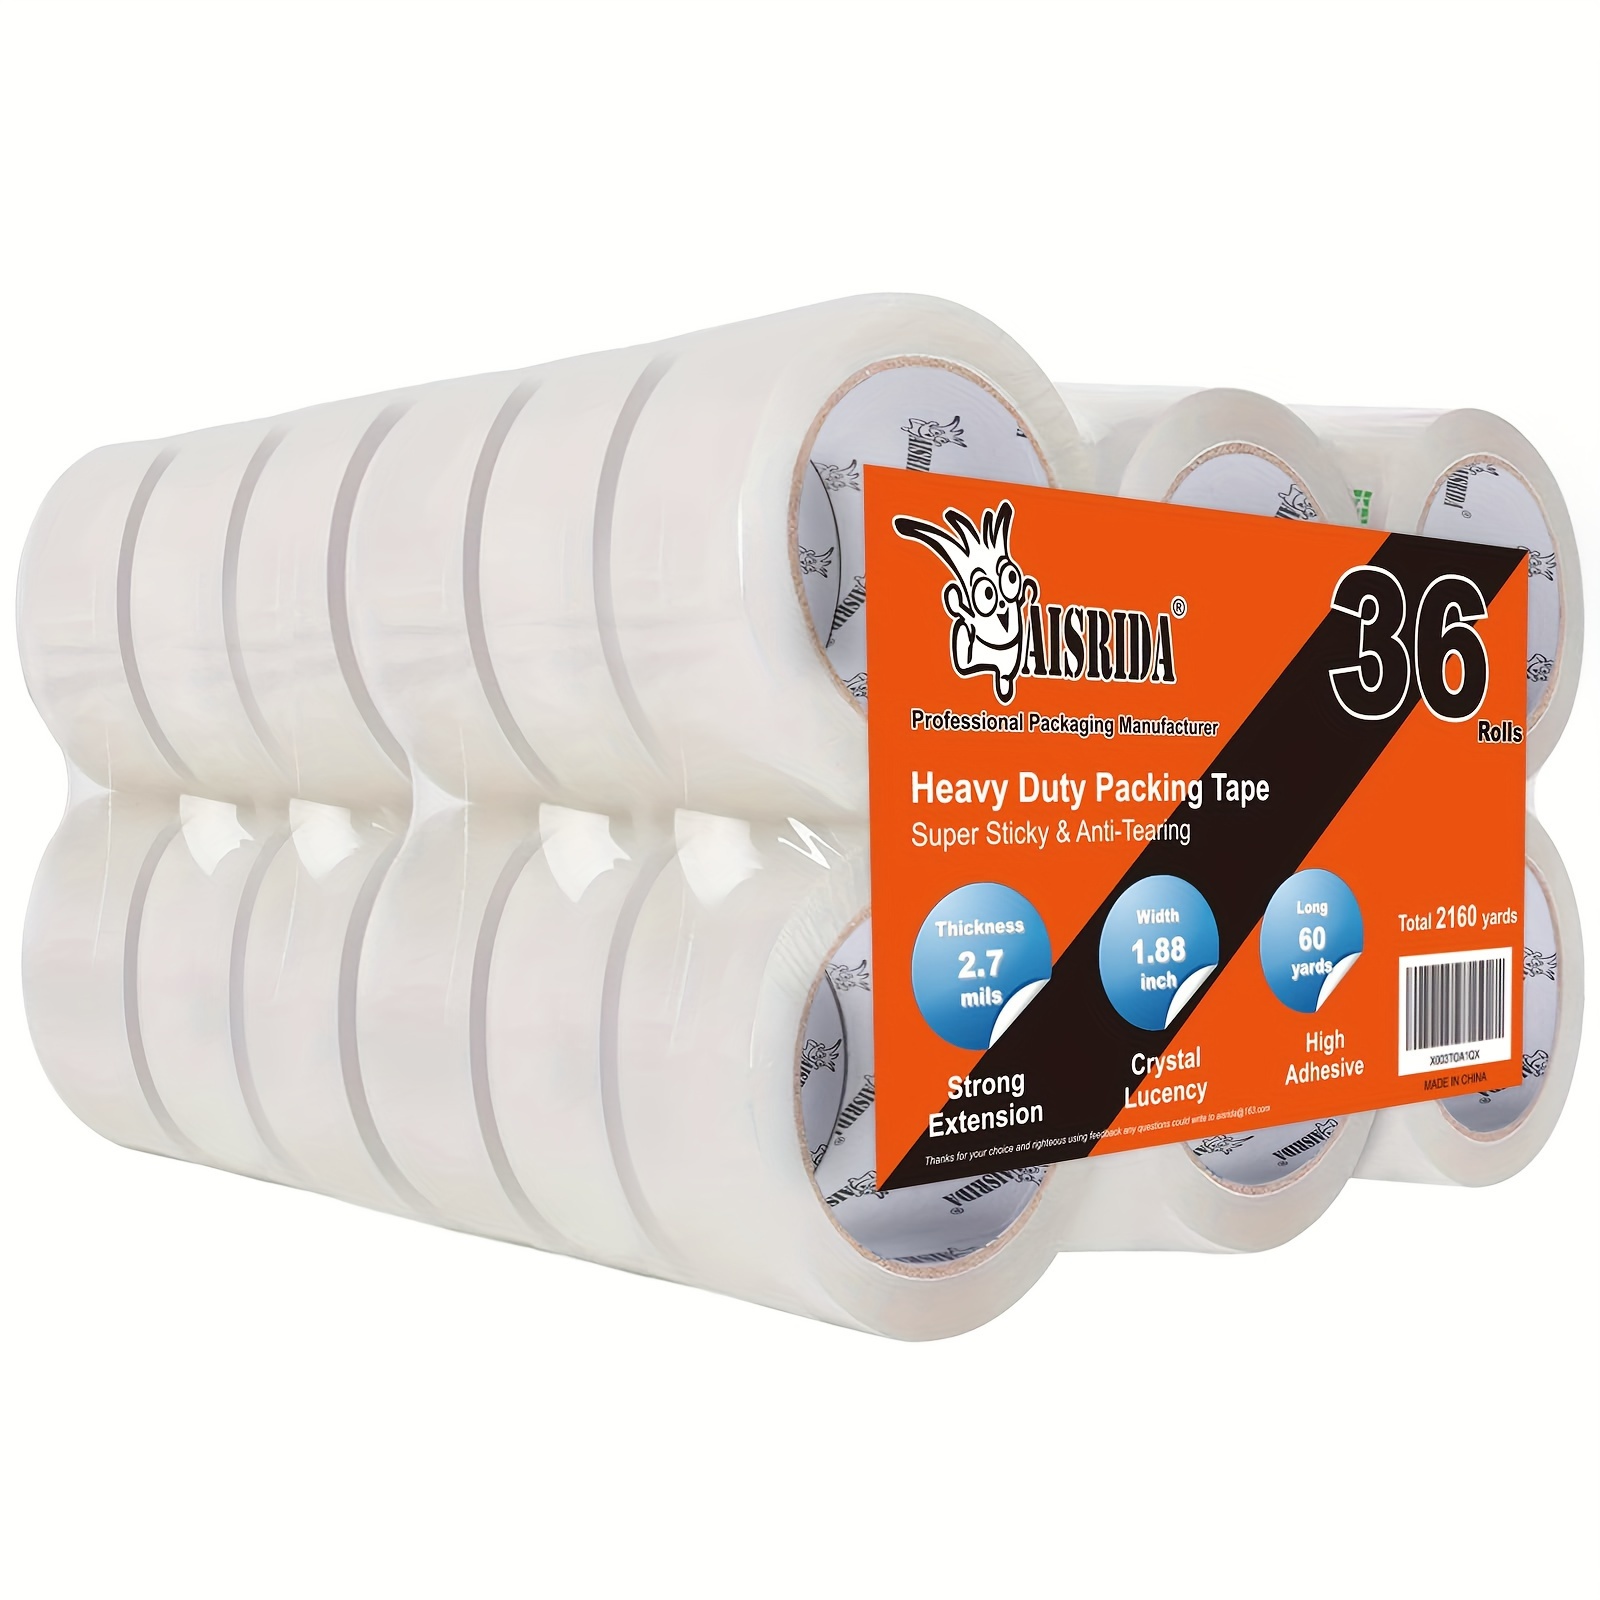 

36 Rolls Of Packing Tape, 2.7 Mil, Heavy Duty Packing Tape For Shipping Mobile Sealing, 1.88" X 60 Yds Per Roll, 2160 Yds Total